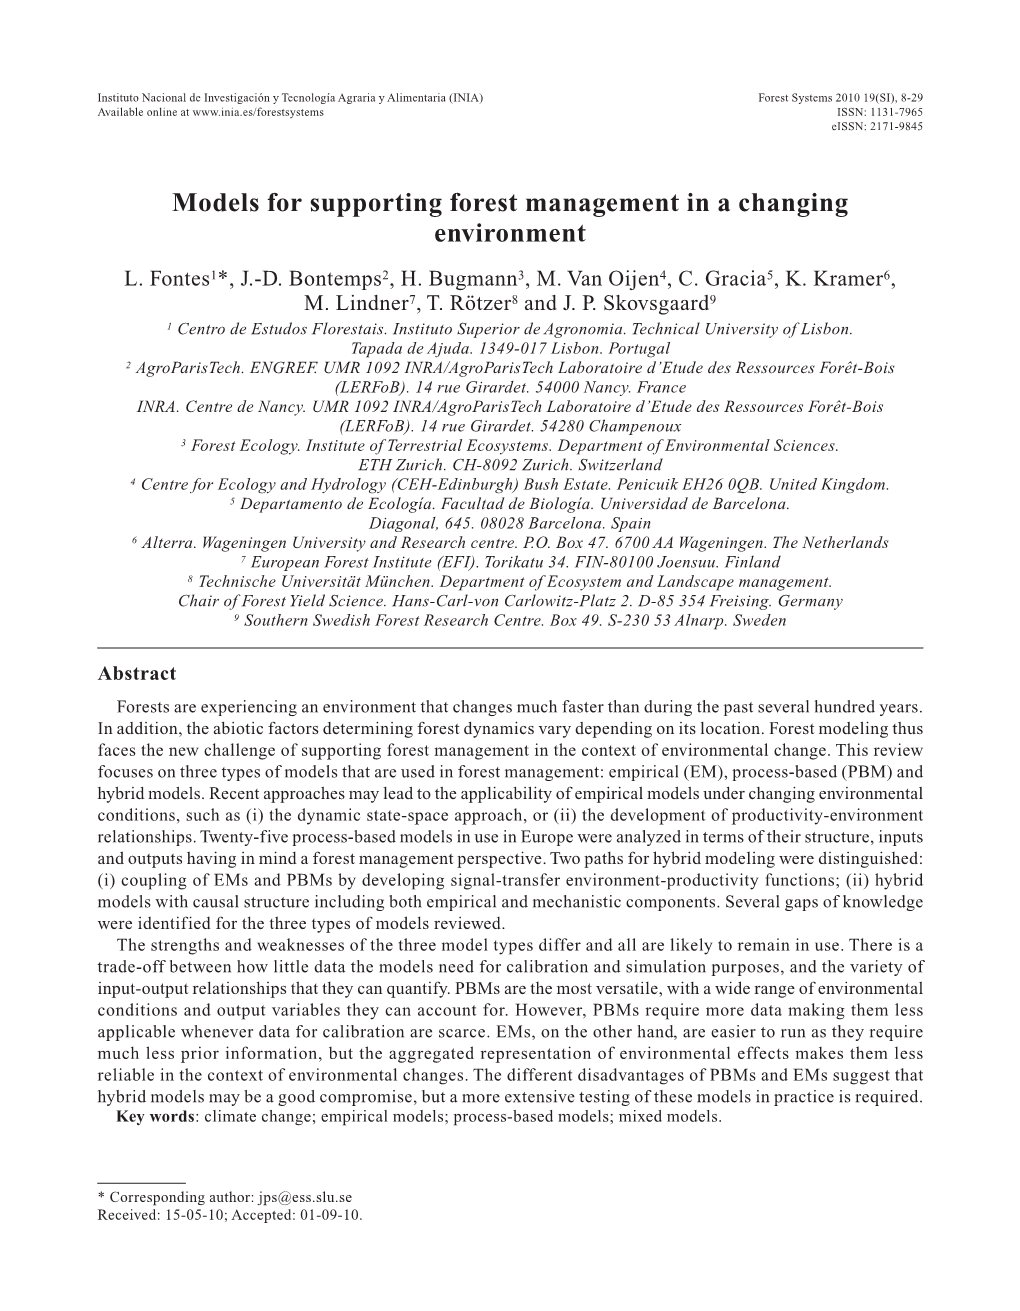 Models for Supporting Forest Management in a Changing Environment